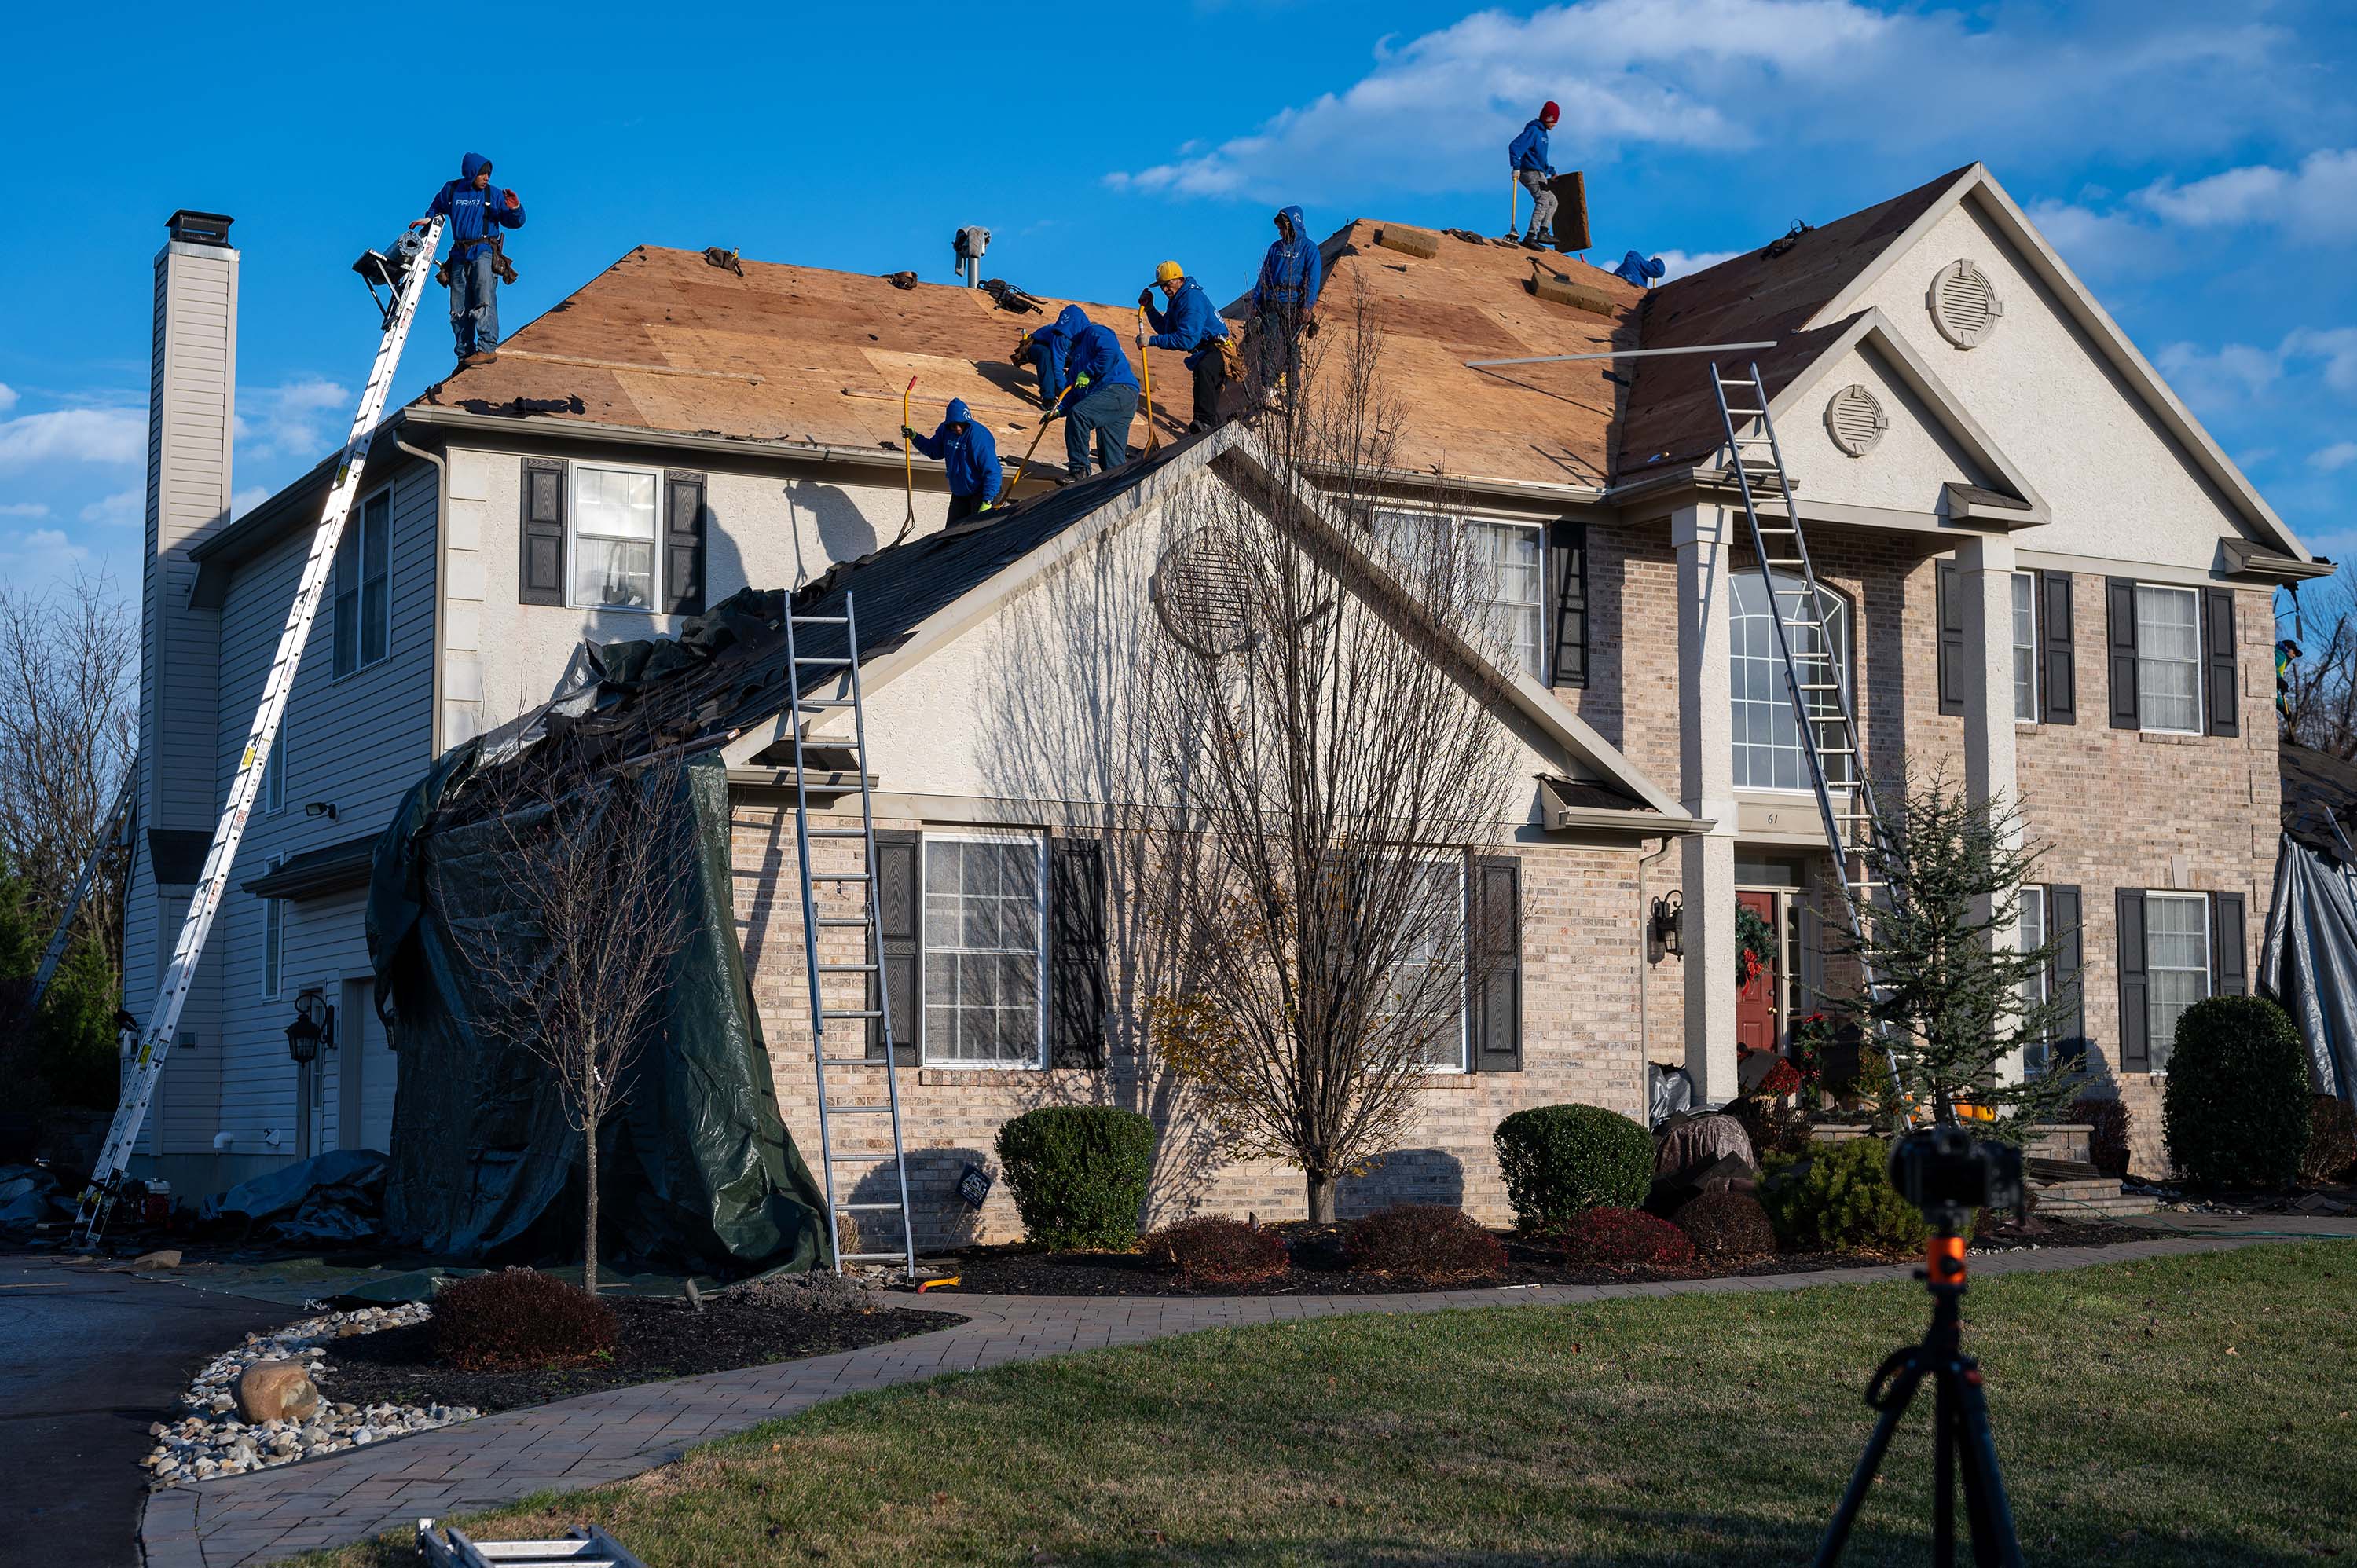 Roof Repair Doylestown company - residential roofing contractors in Doylestown, PA (large image)